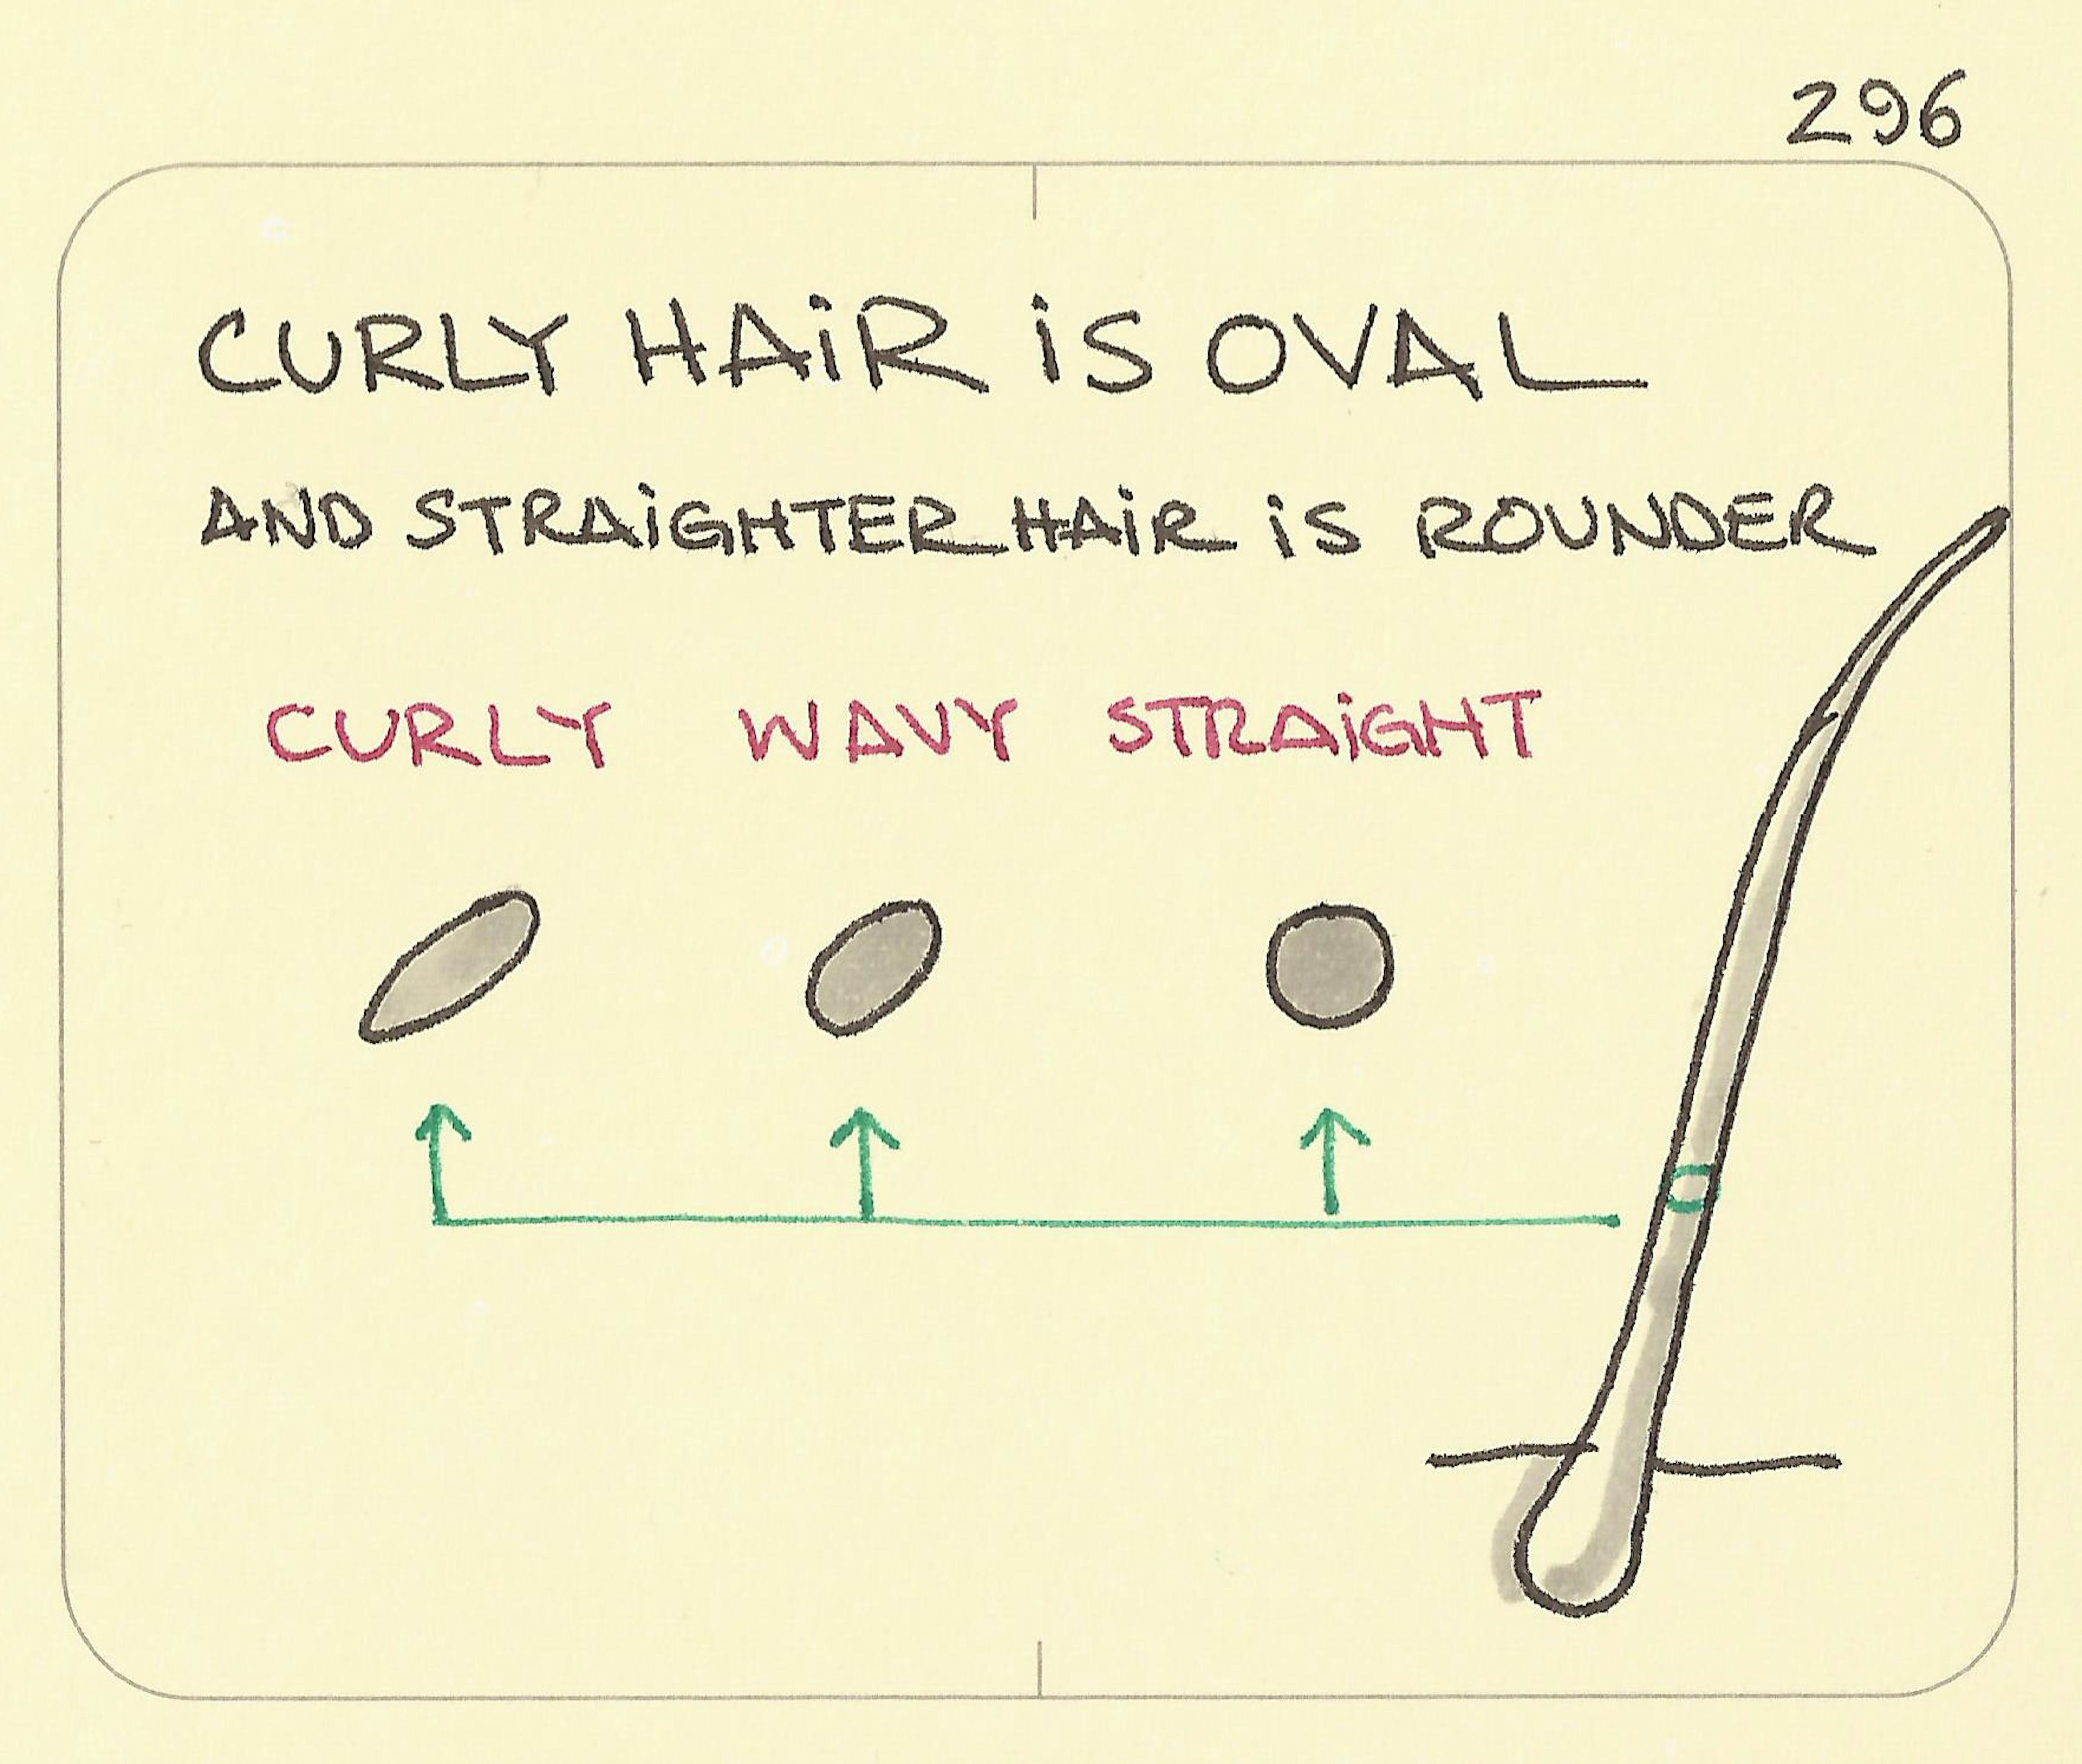 Curly hair is oval illustration showing the cross-section of a hair follicle from oval to round and labelling it with curly, wavy, and straight